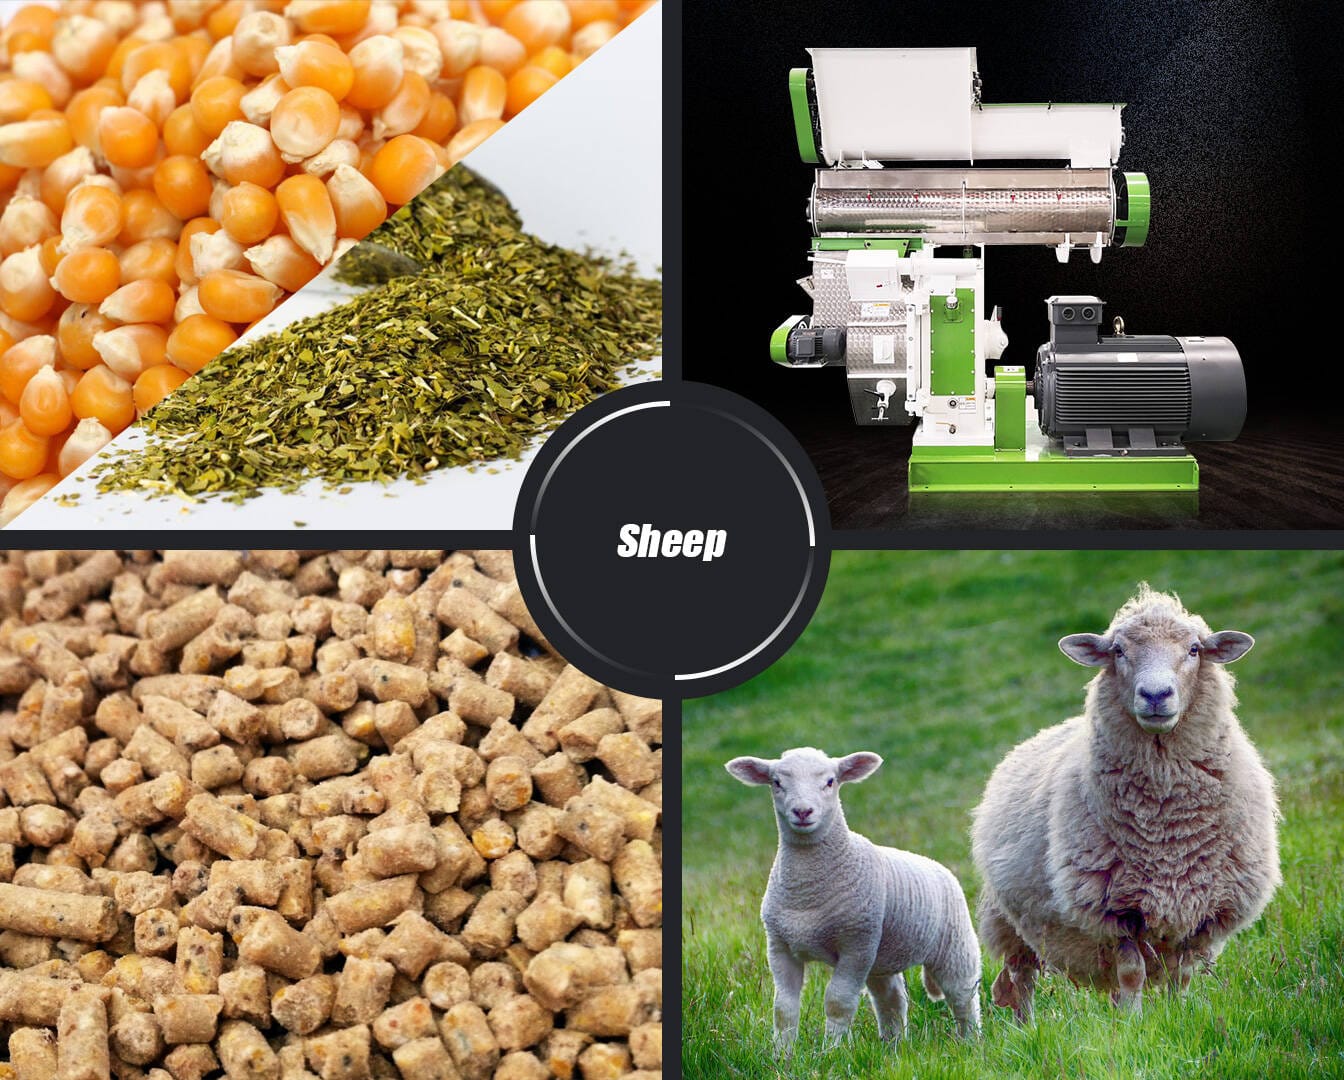 How to Make Sheep Feed Pellets, Feed Pellet Production Line | RICHI